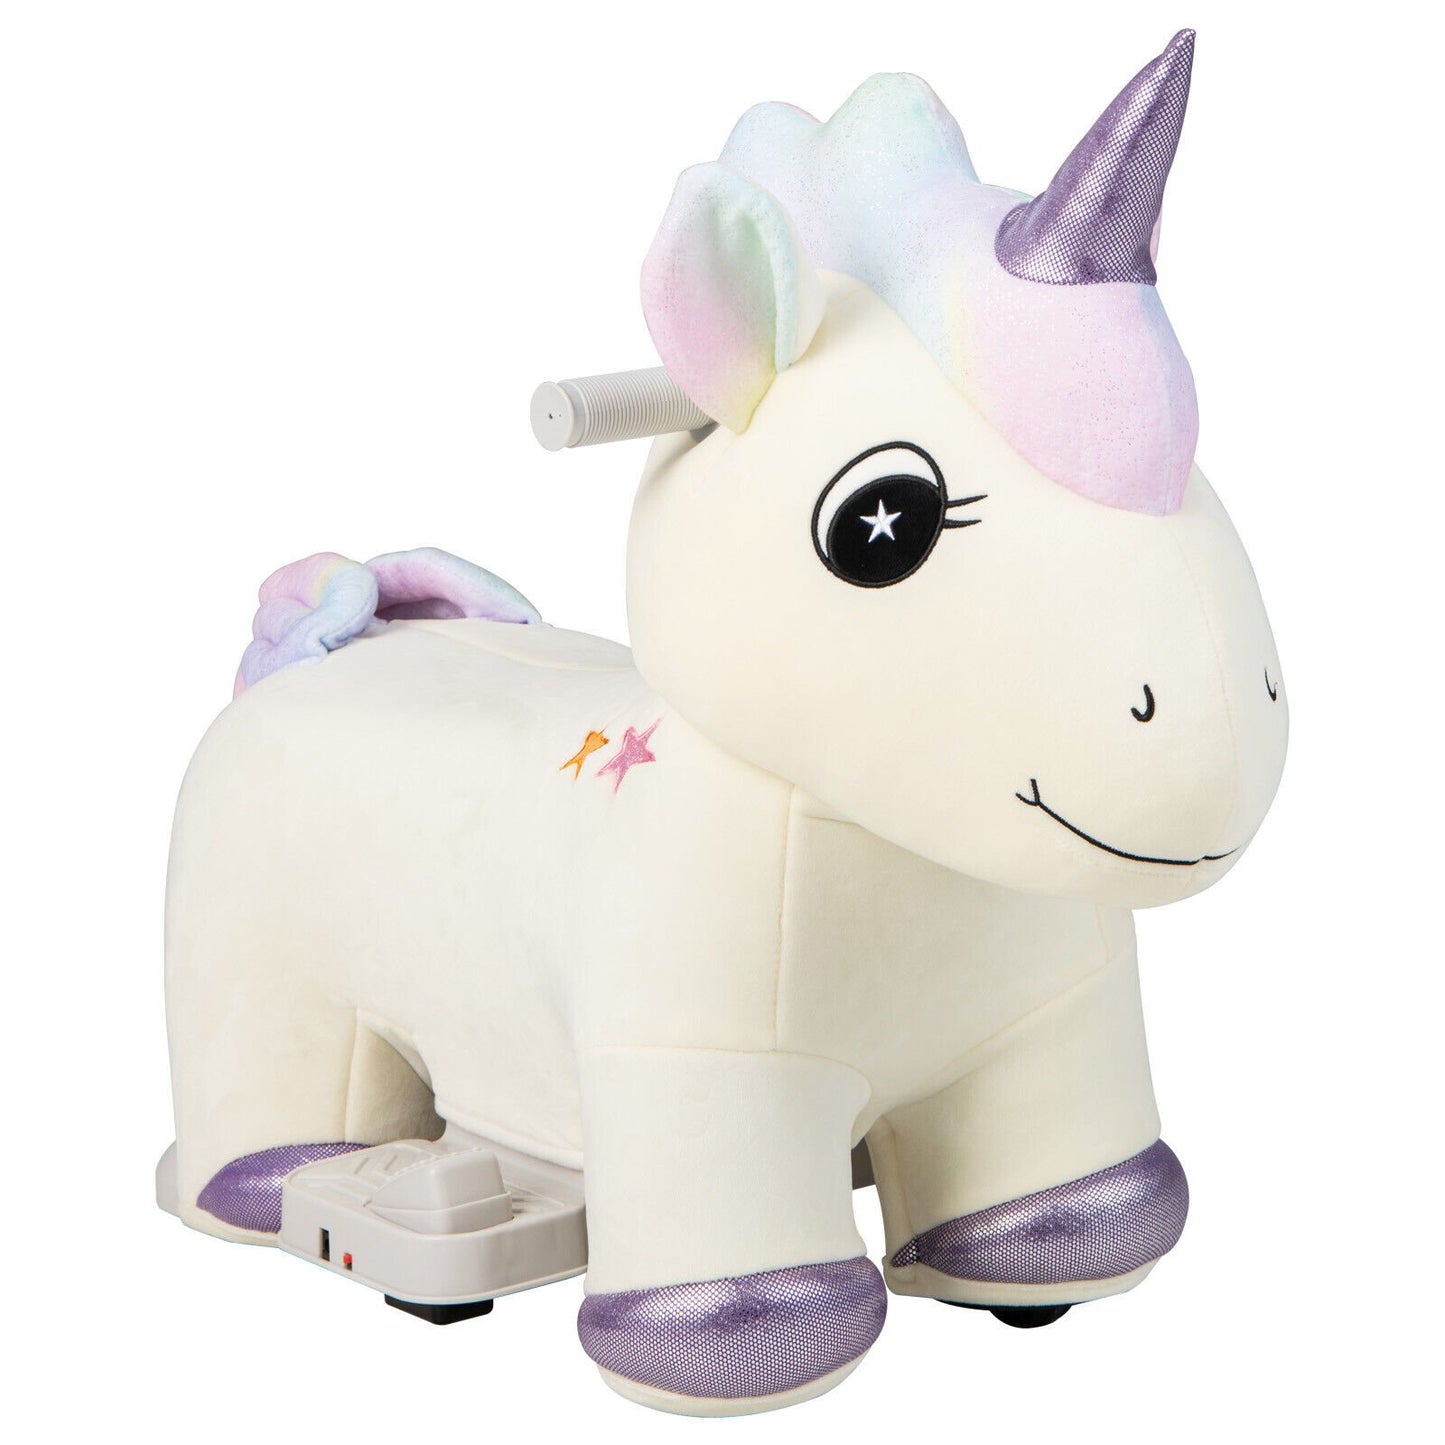 6V Electric Animal Ride On Toy with Music and Handlebars, Beige